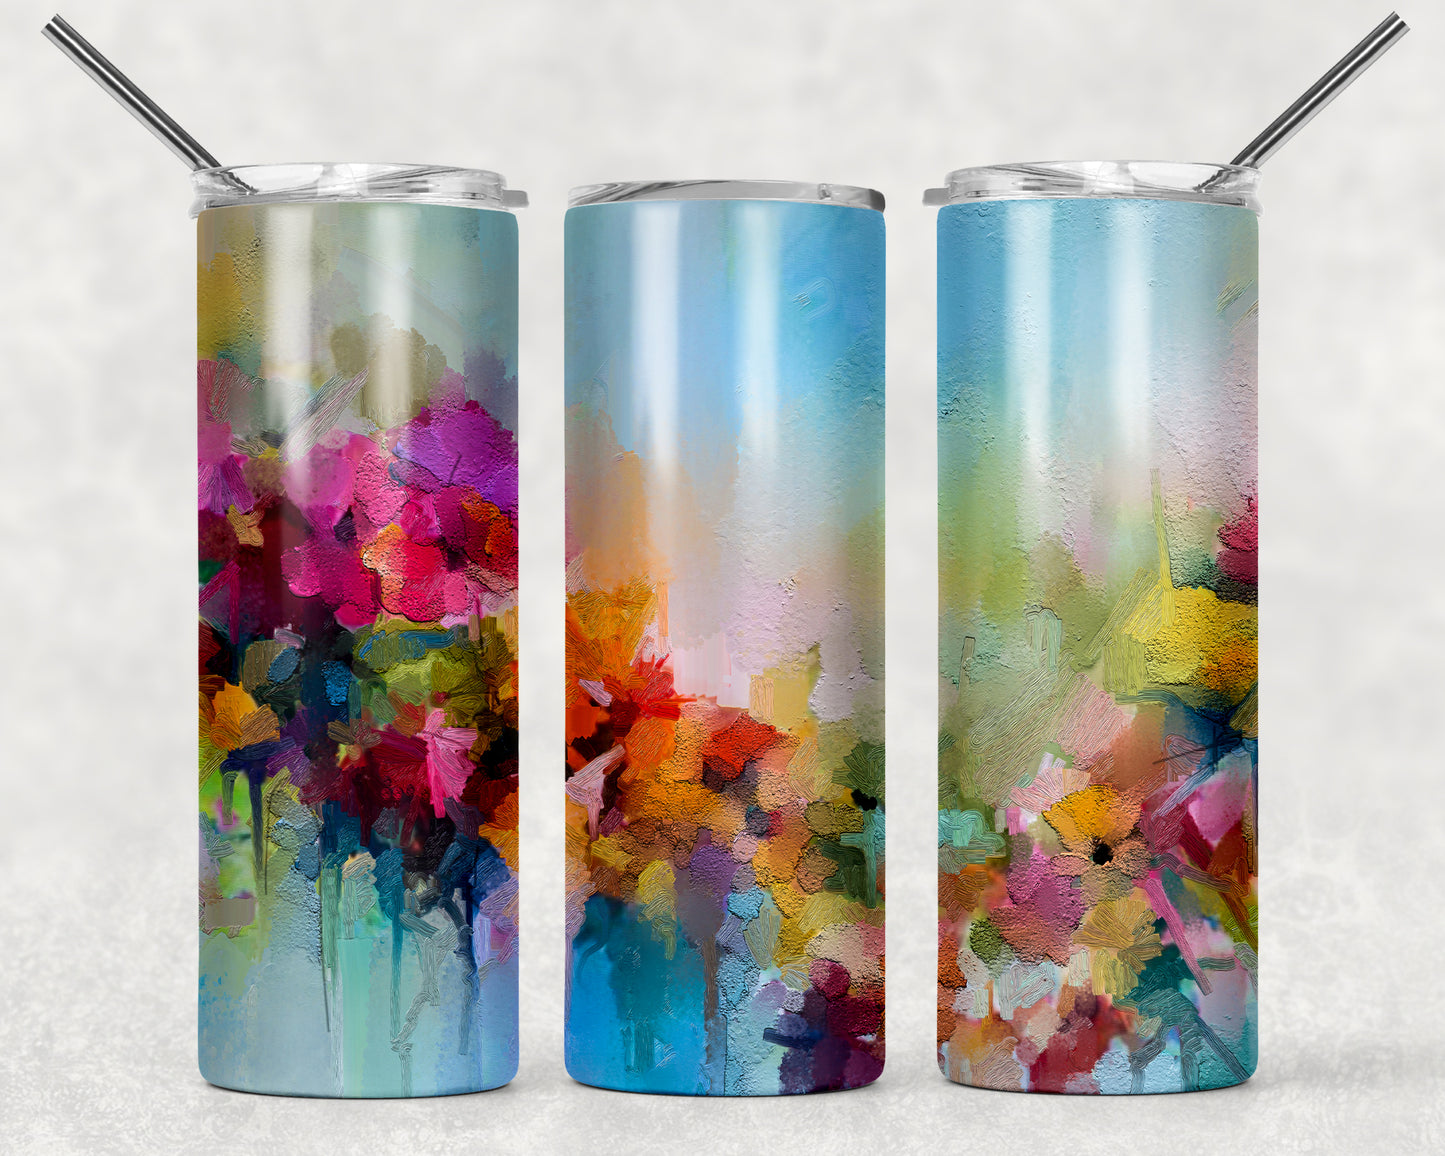 Bright Color Abstract Floral Tumbler, 20oz Tumblr, Hot or Cold Beverage Holder